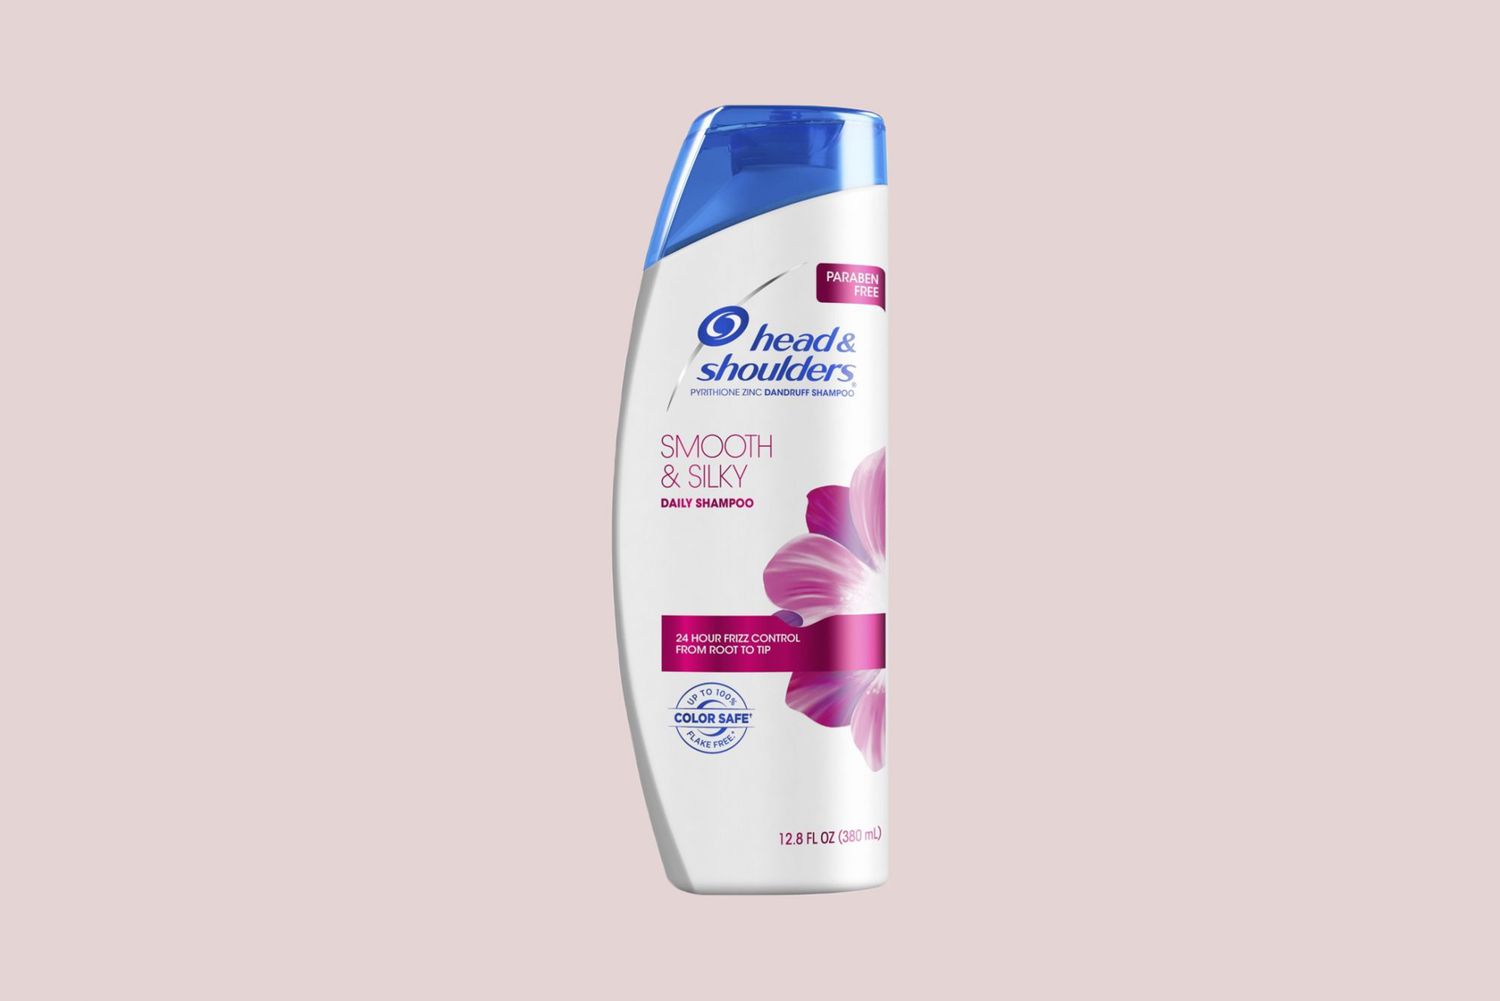 Head and Shoulders Smooth & Silky Paraben Free Dandruff Shampoo